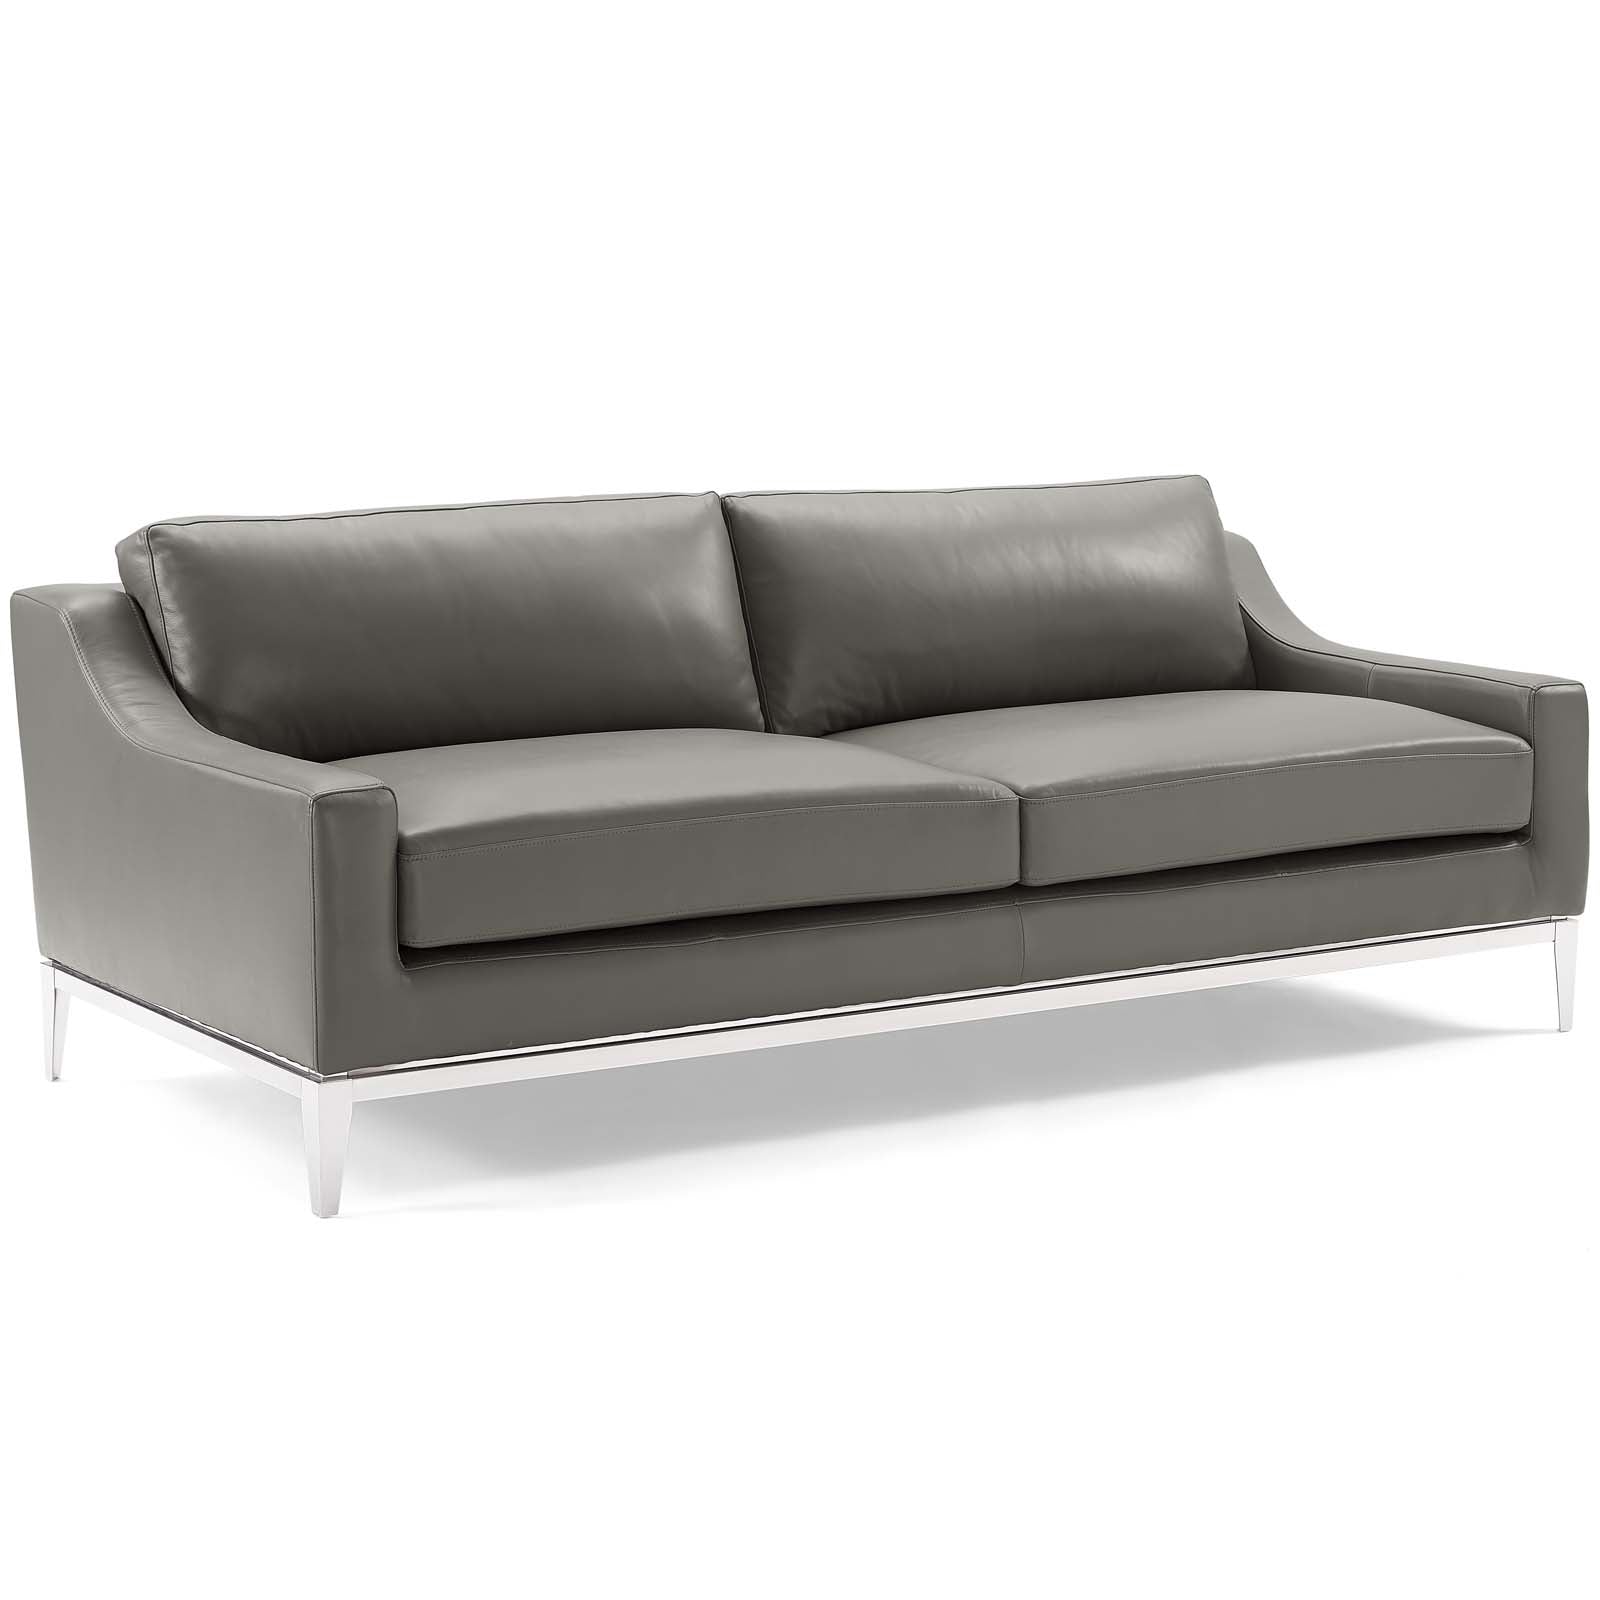 Modway Living Room Sets - Harness Stainless Steel Base Leather Sofa & Armchair Set Gray